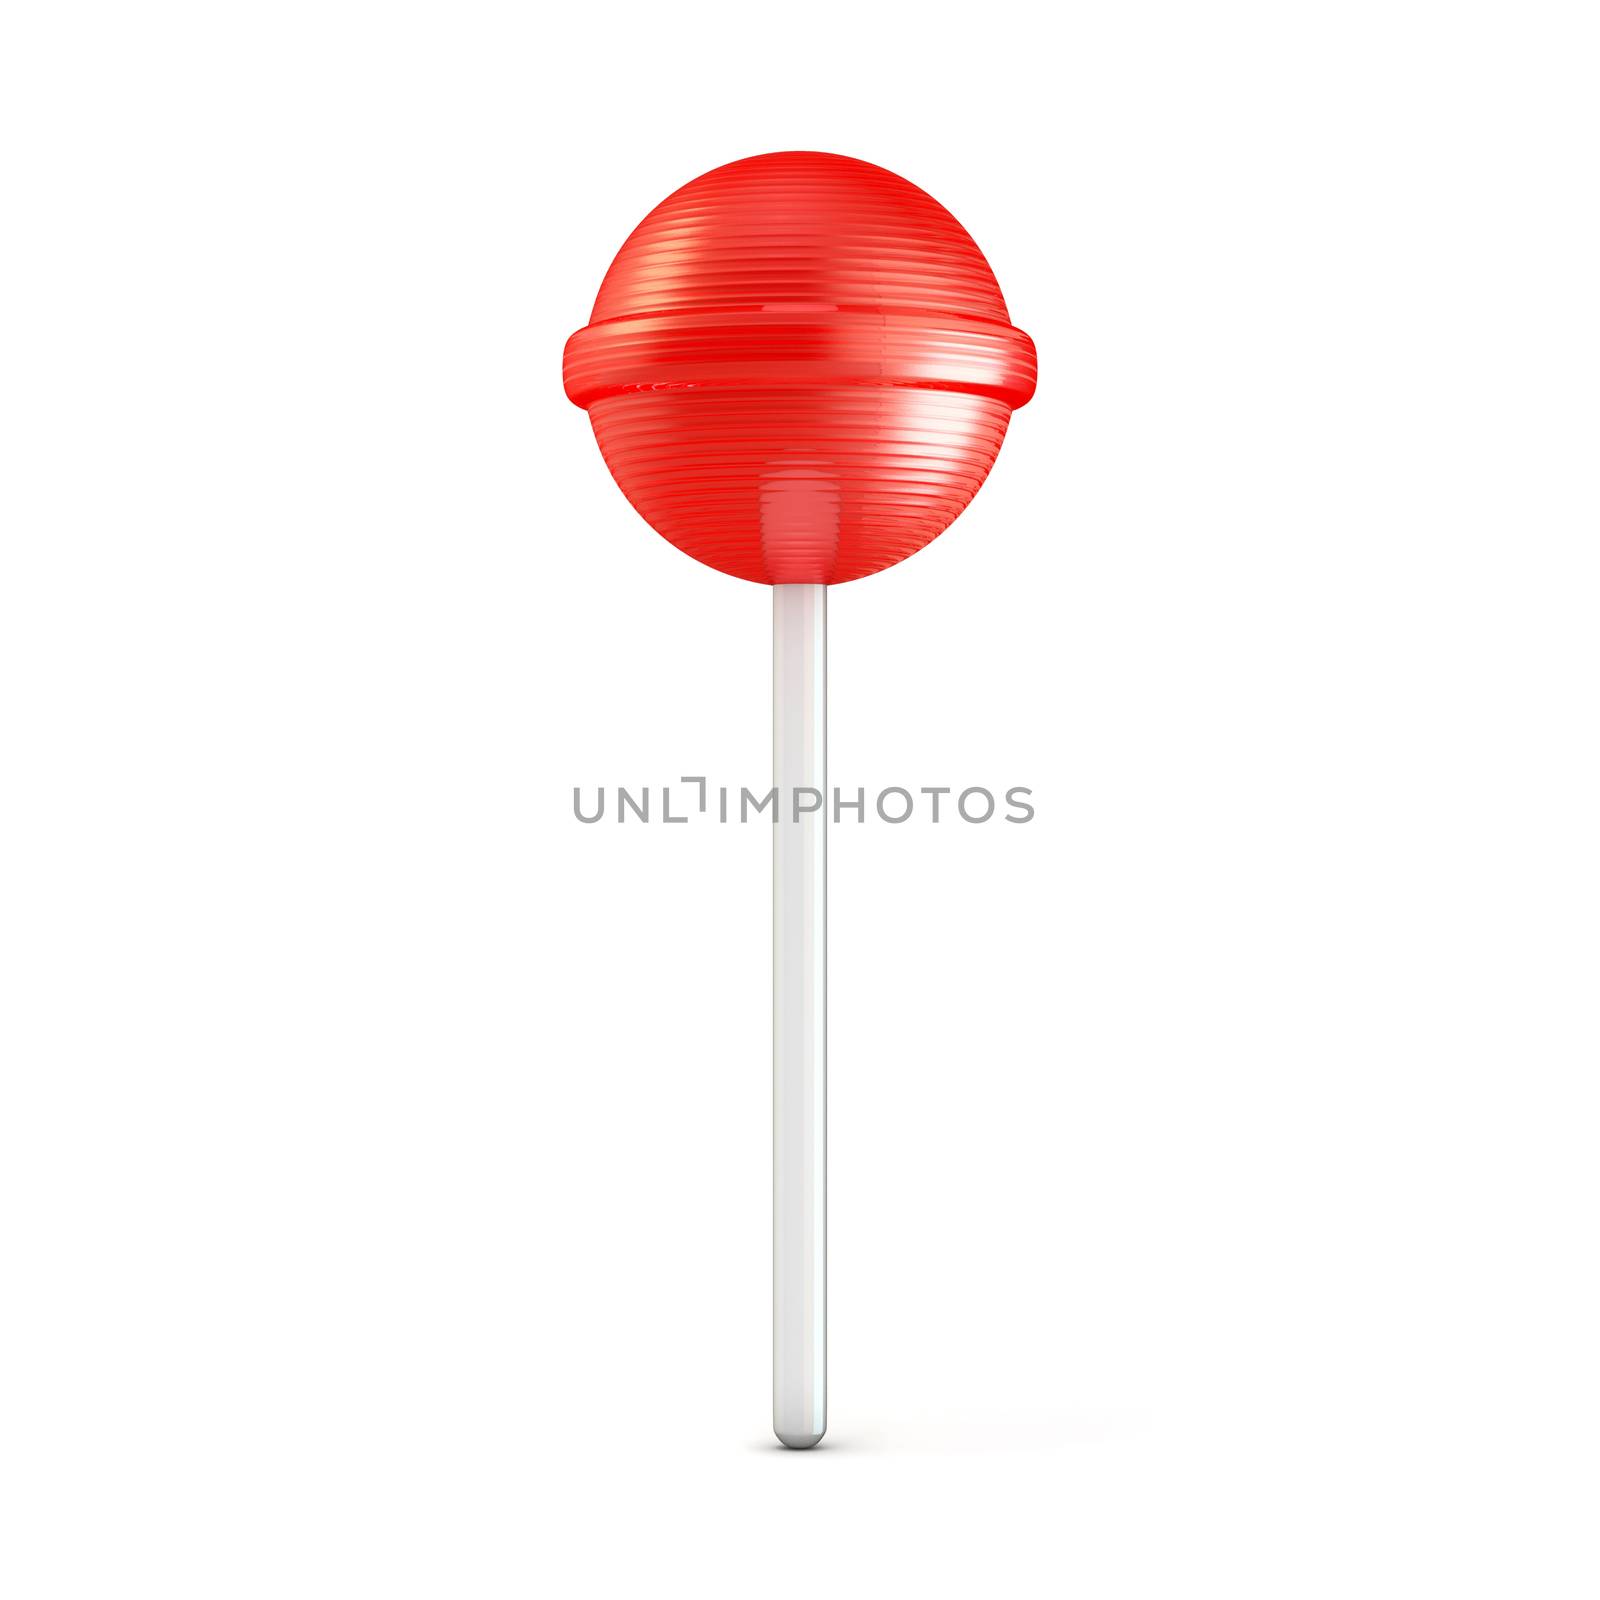 Single red lollipop. 3D render illustration isolated on white background